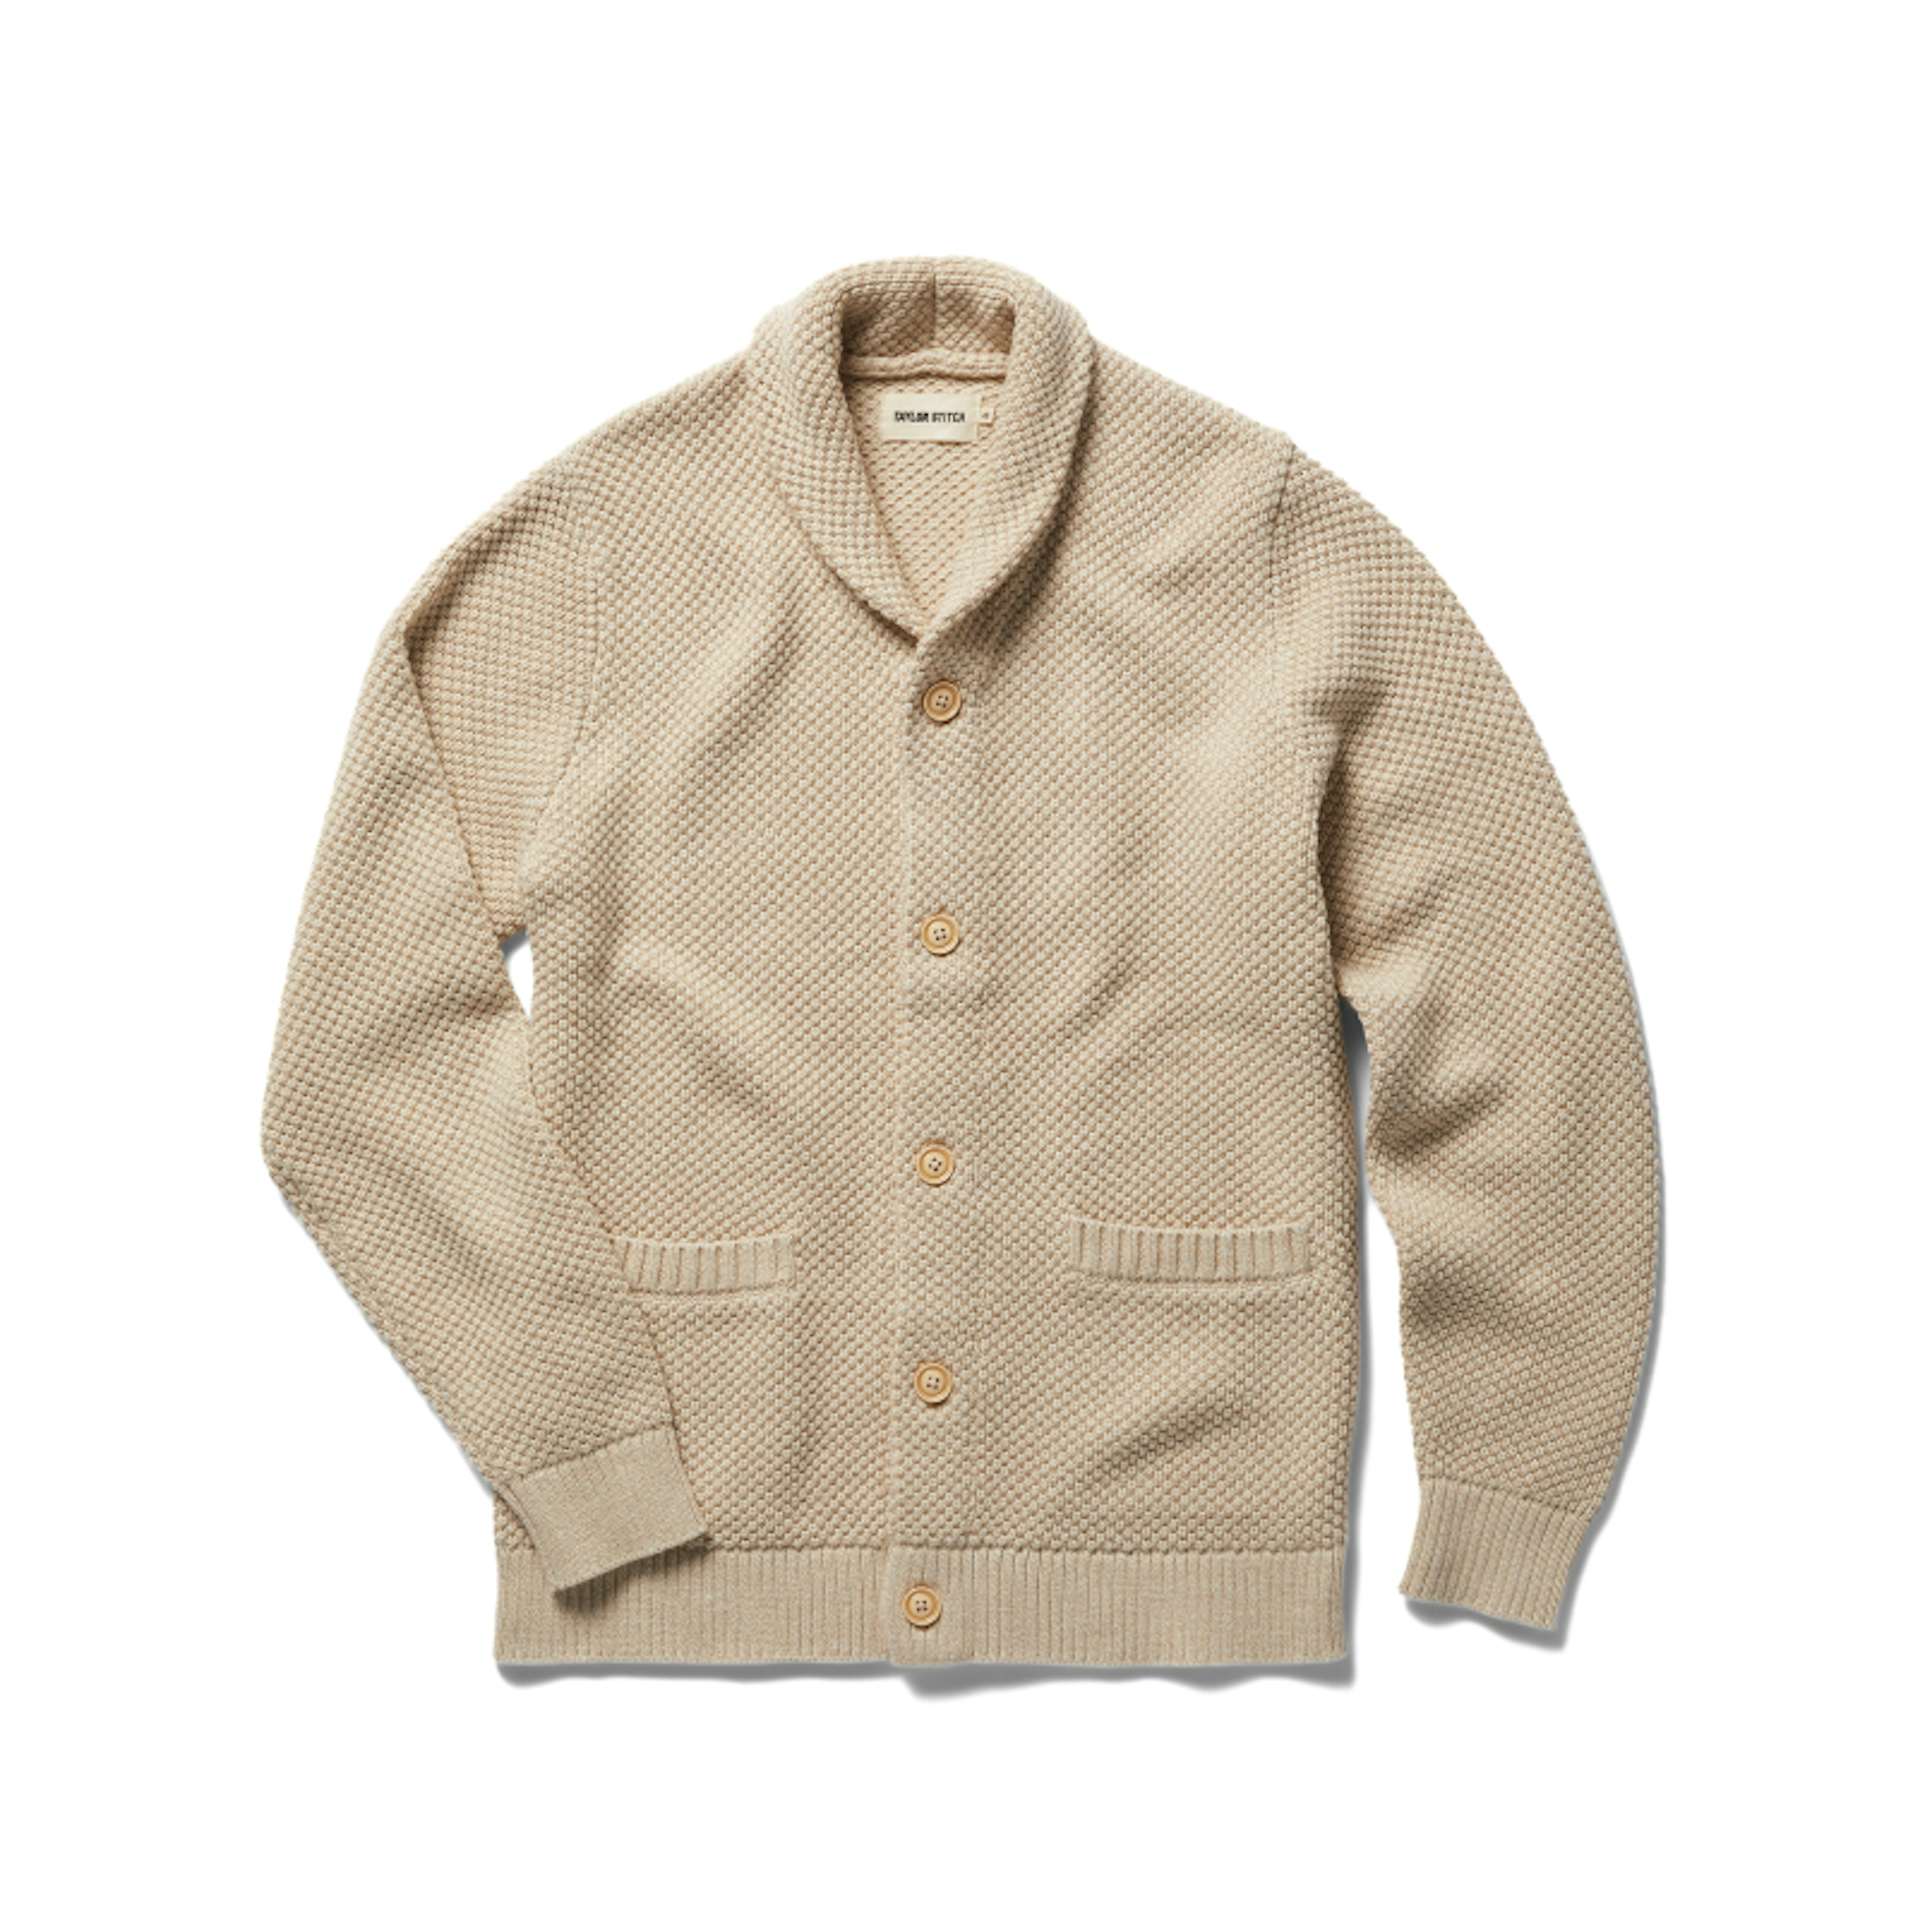 Photo 1 of 1 in Taylor Stitch The Crawford Sweater - Dwell